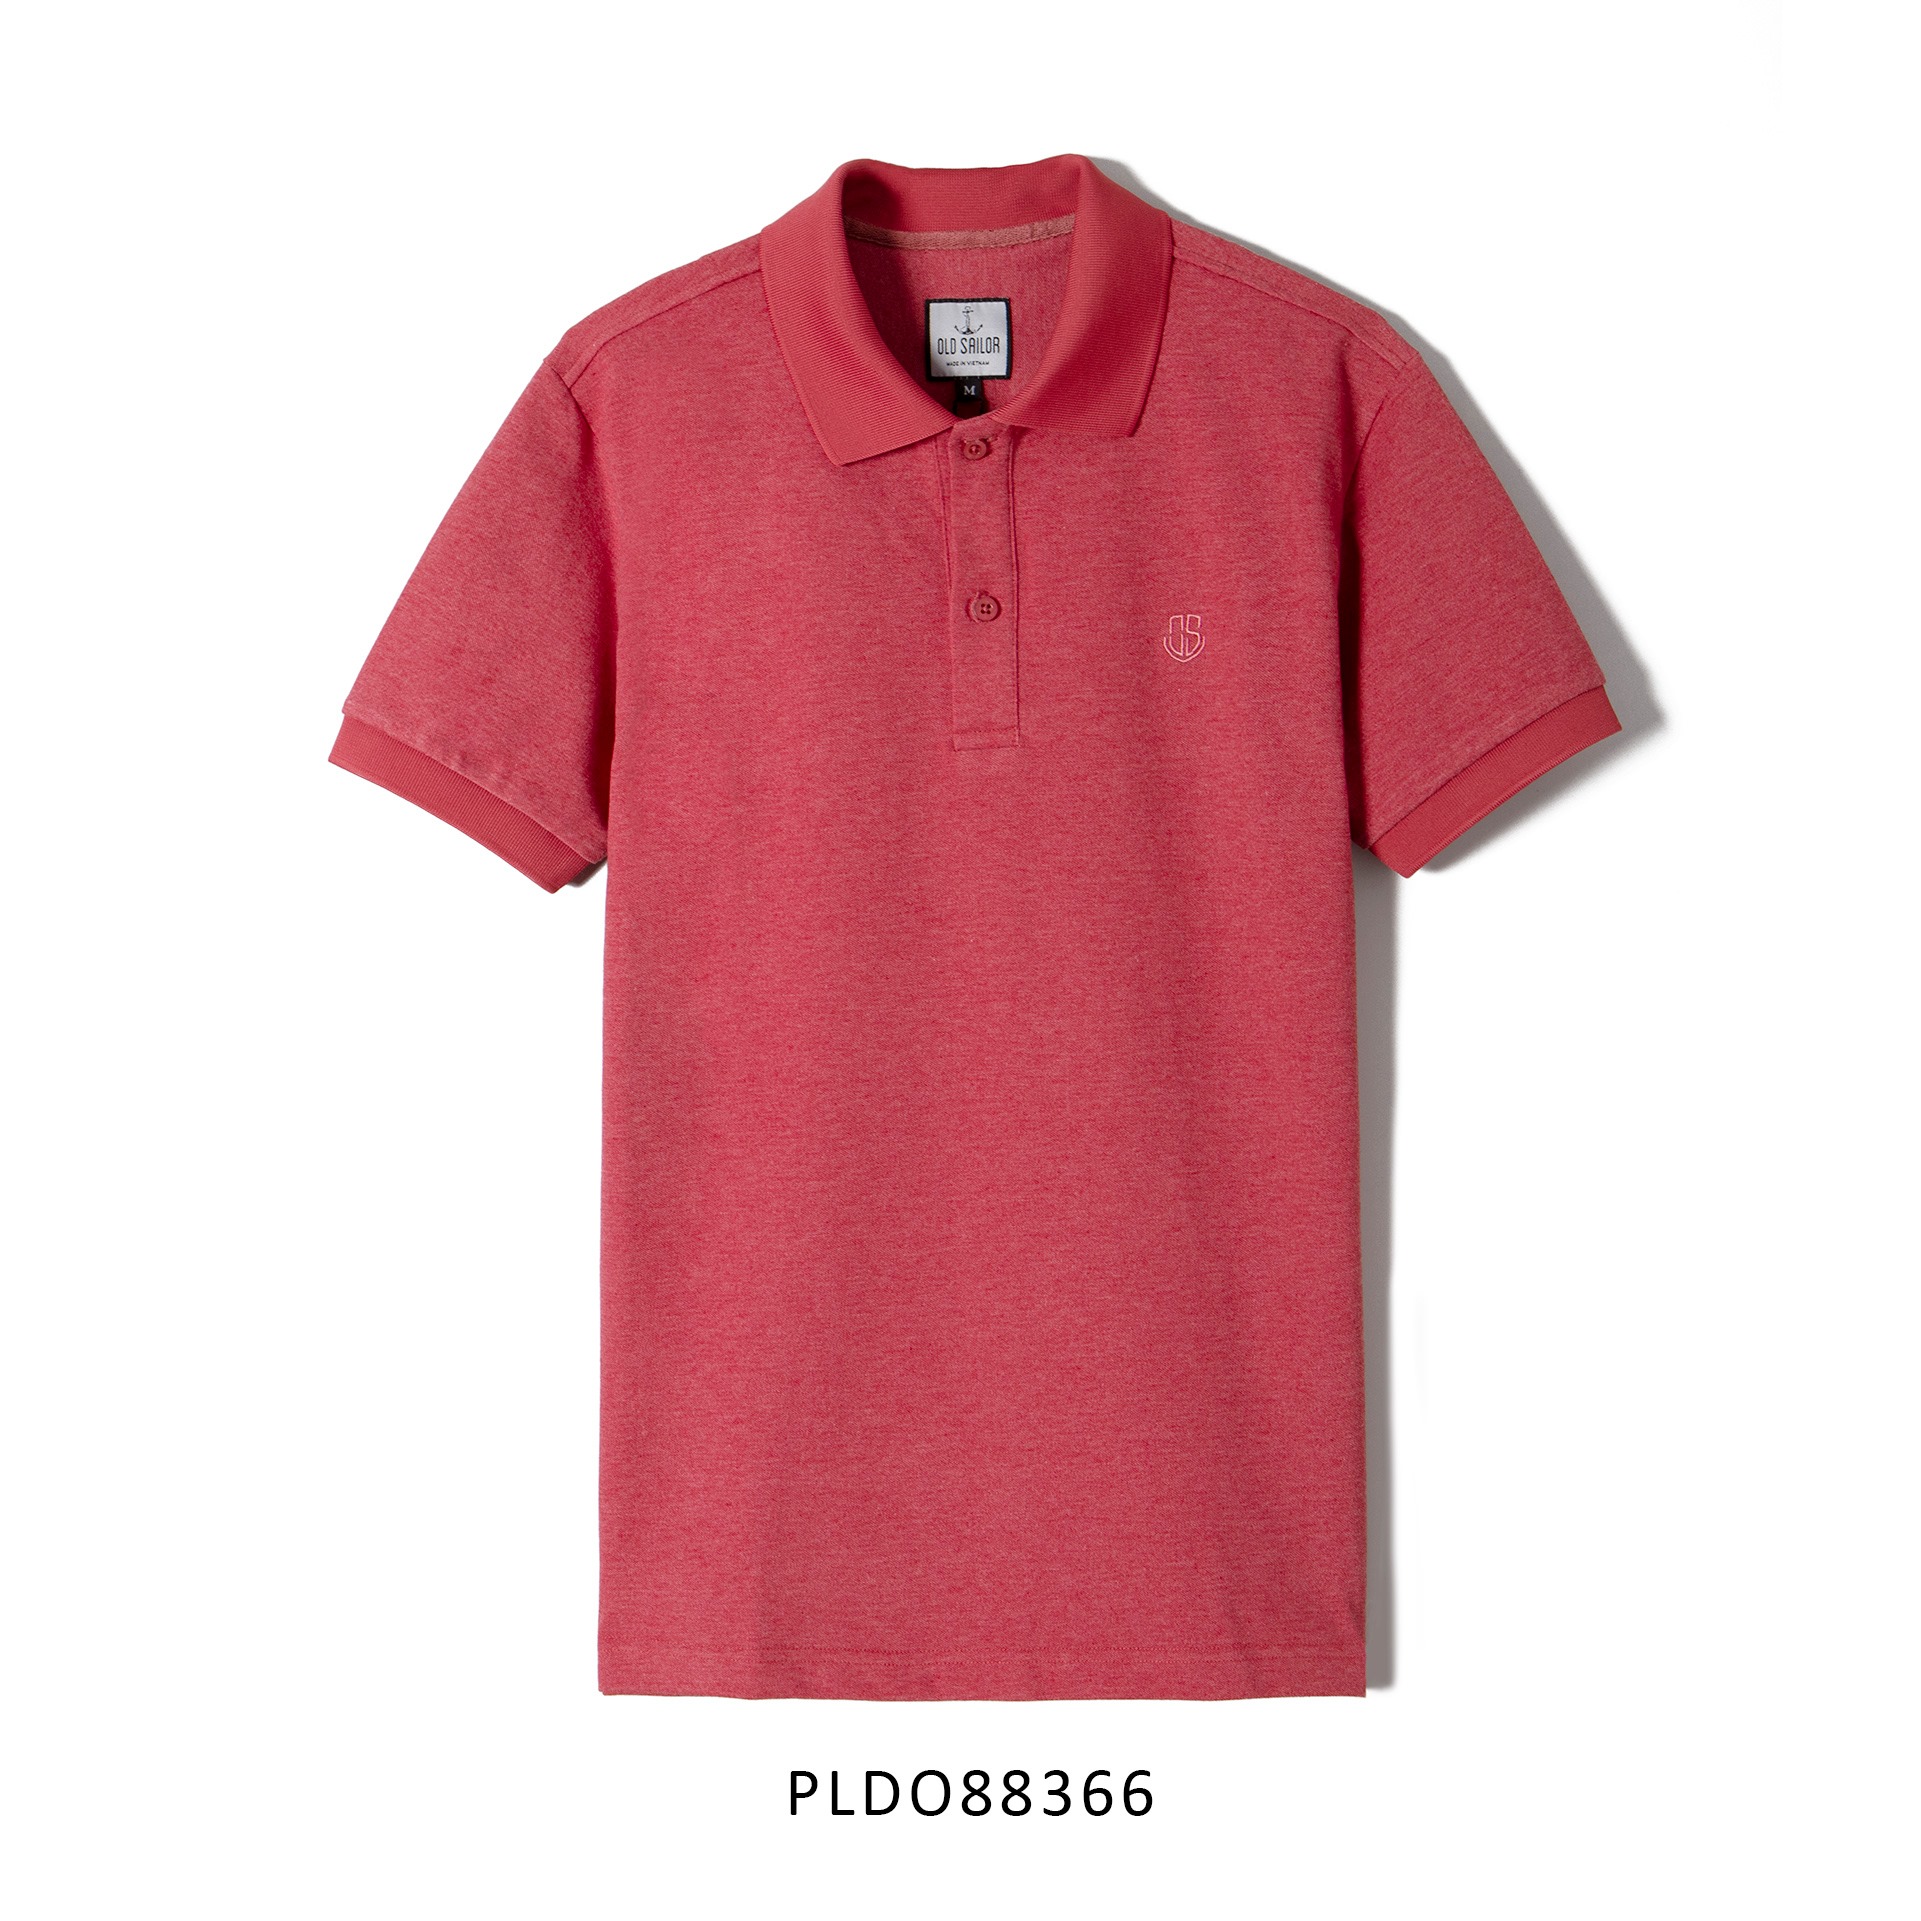 O.S.L POLO - RED